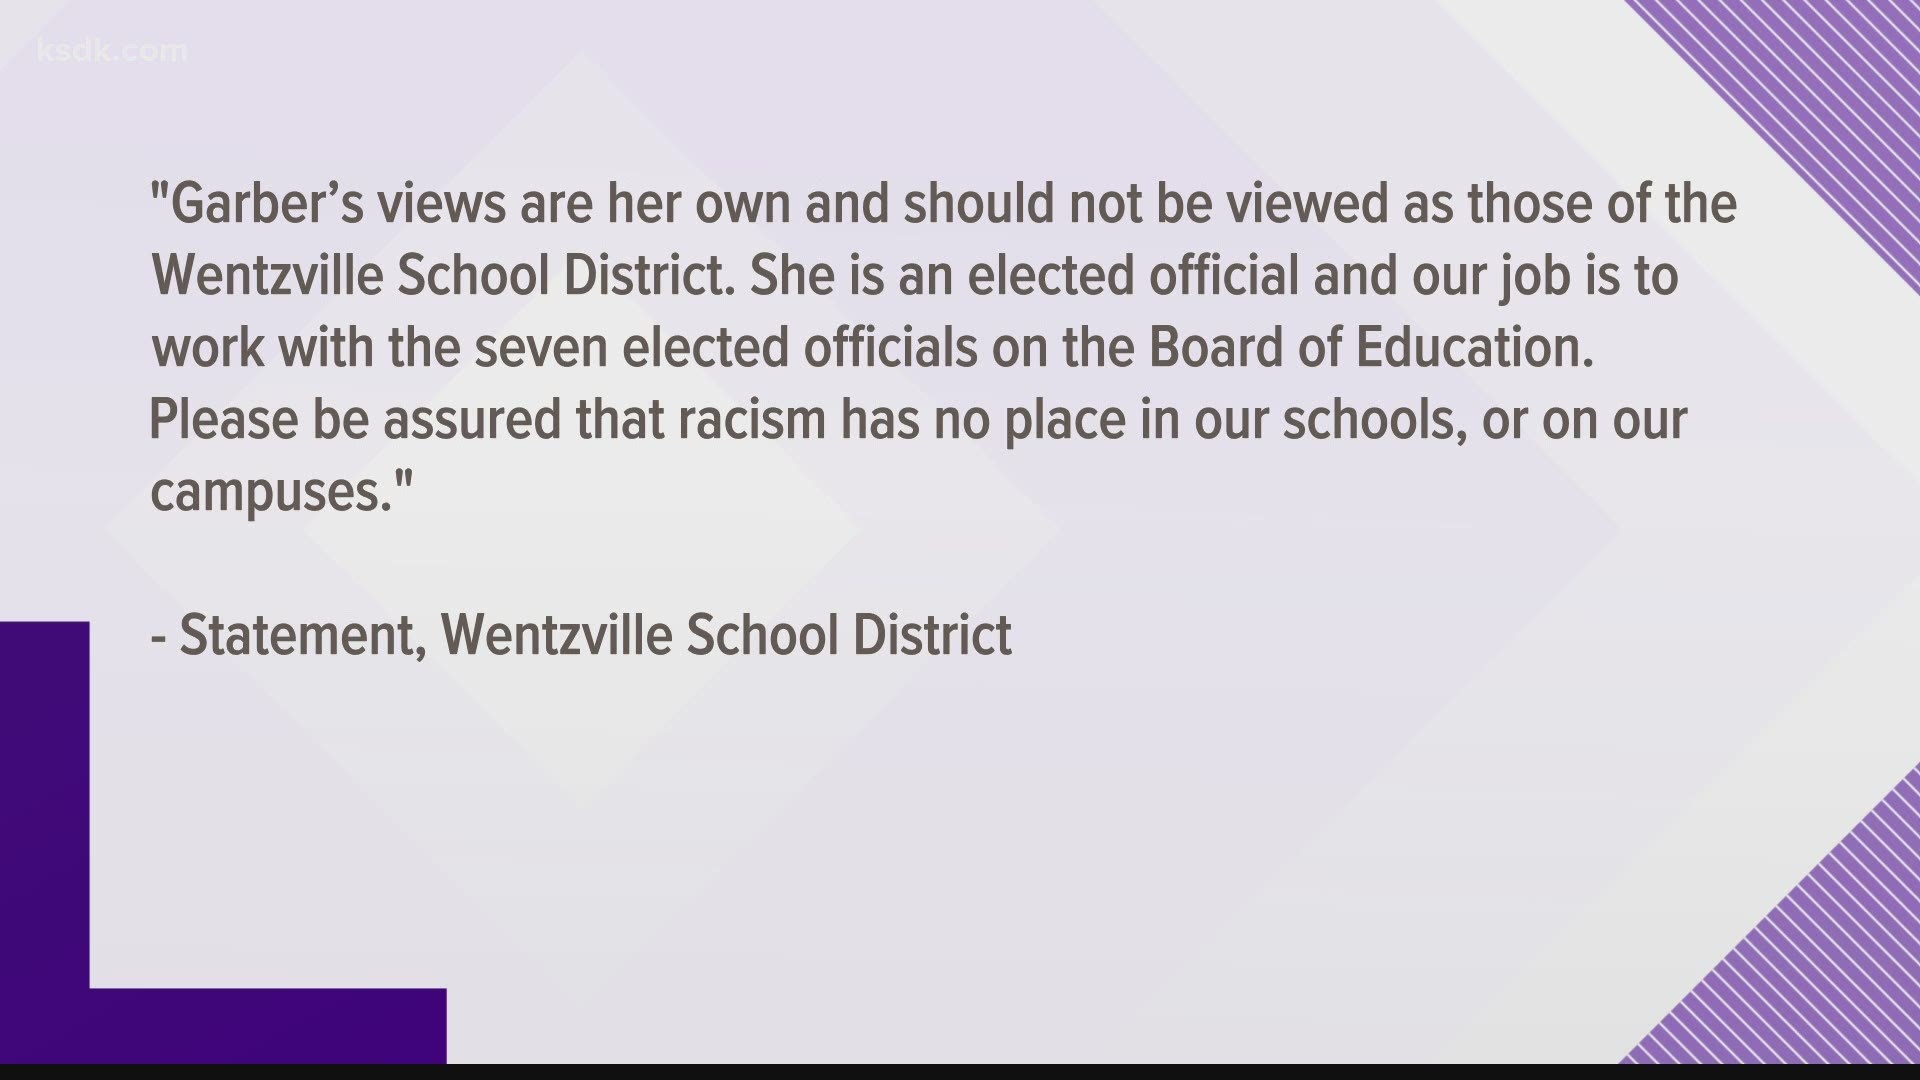 The Wentzville School District said in a statement "racism has no place in our schools or our campuses."